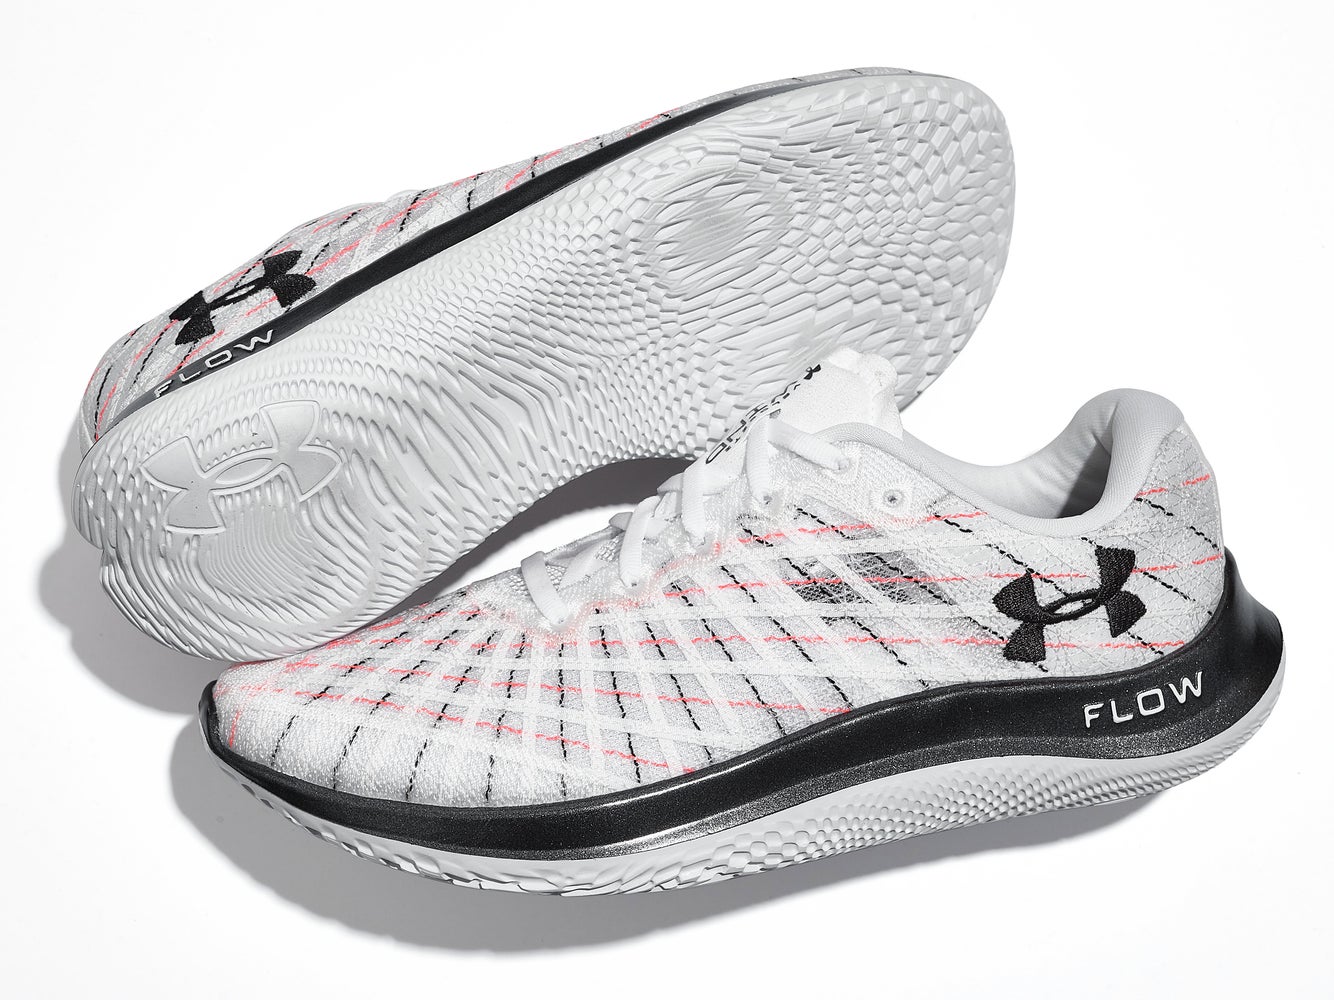 Under Armour FLOW Velociti Wind Shoe Review | Running Warehouse